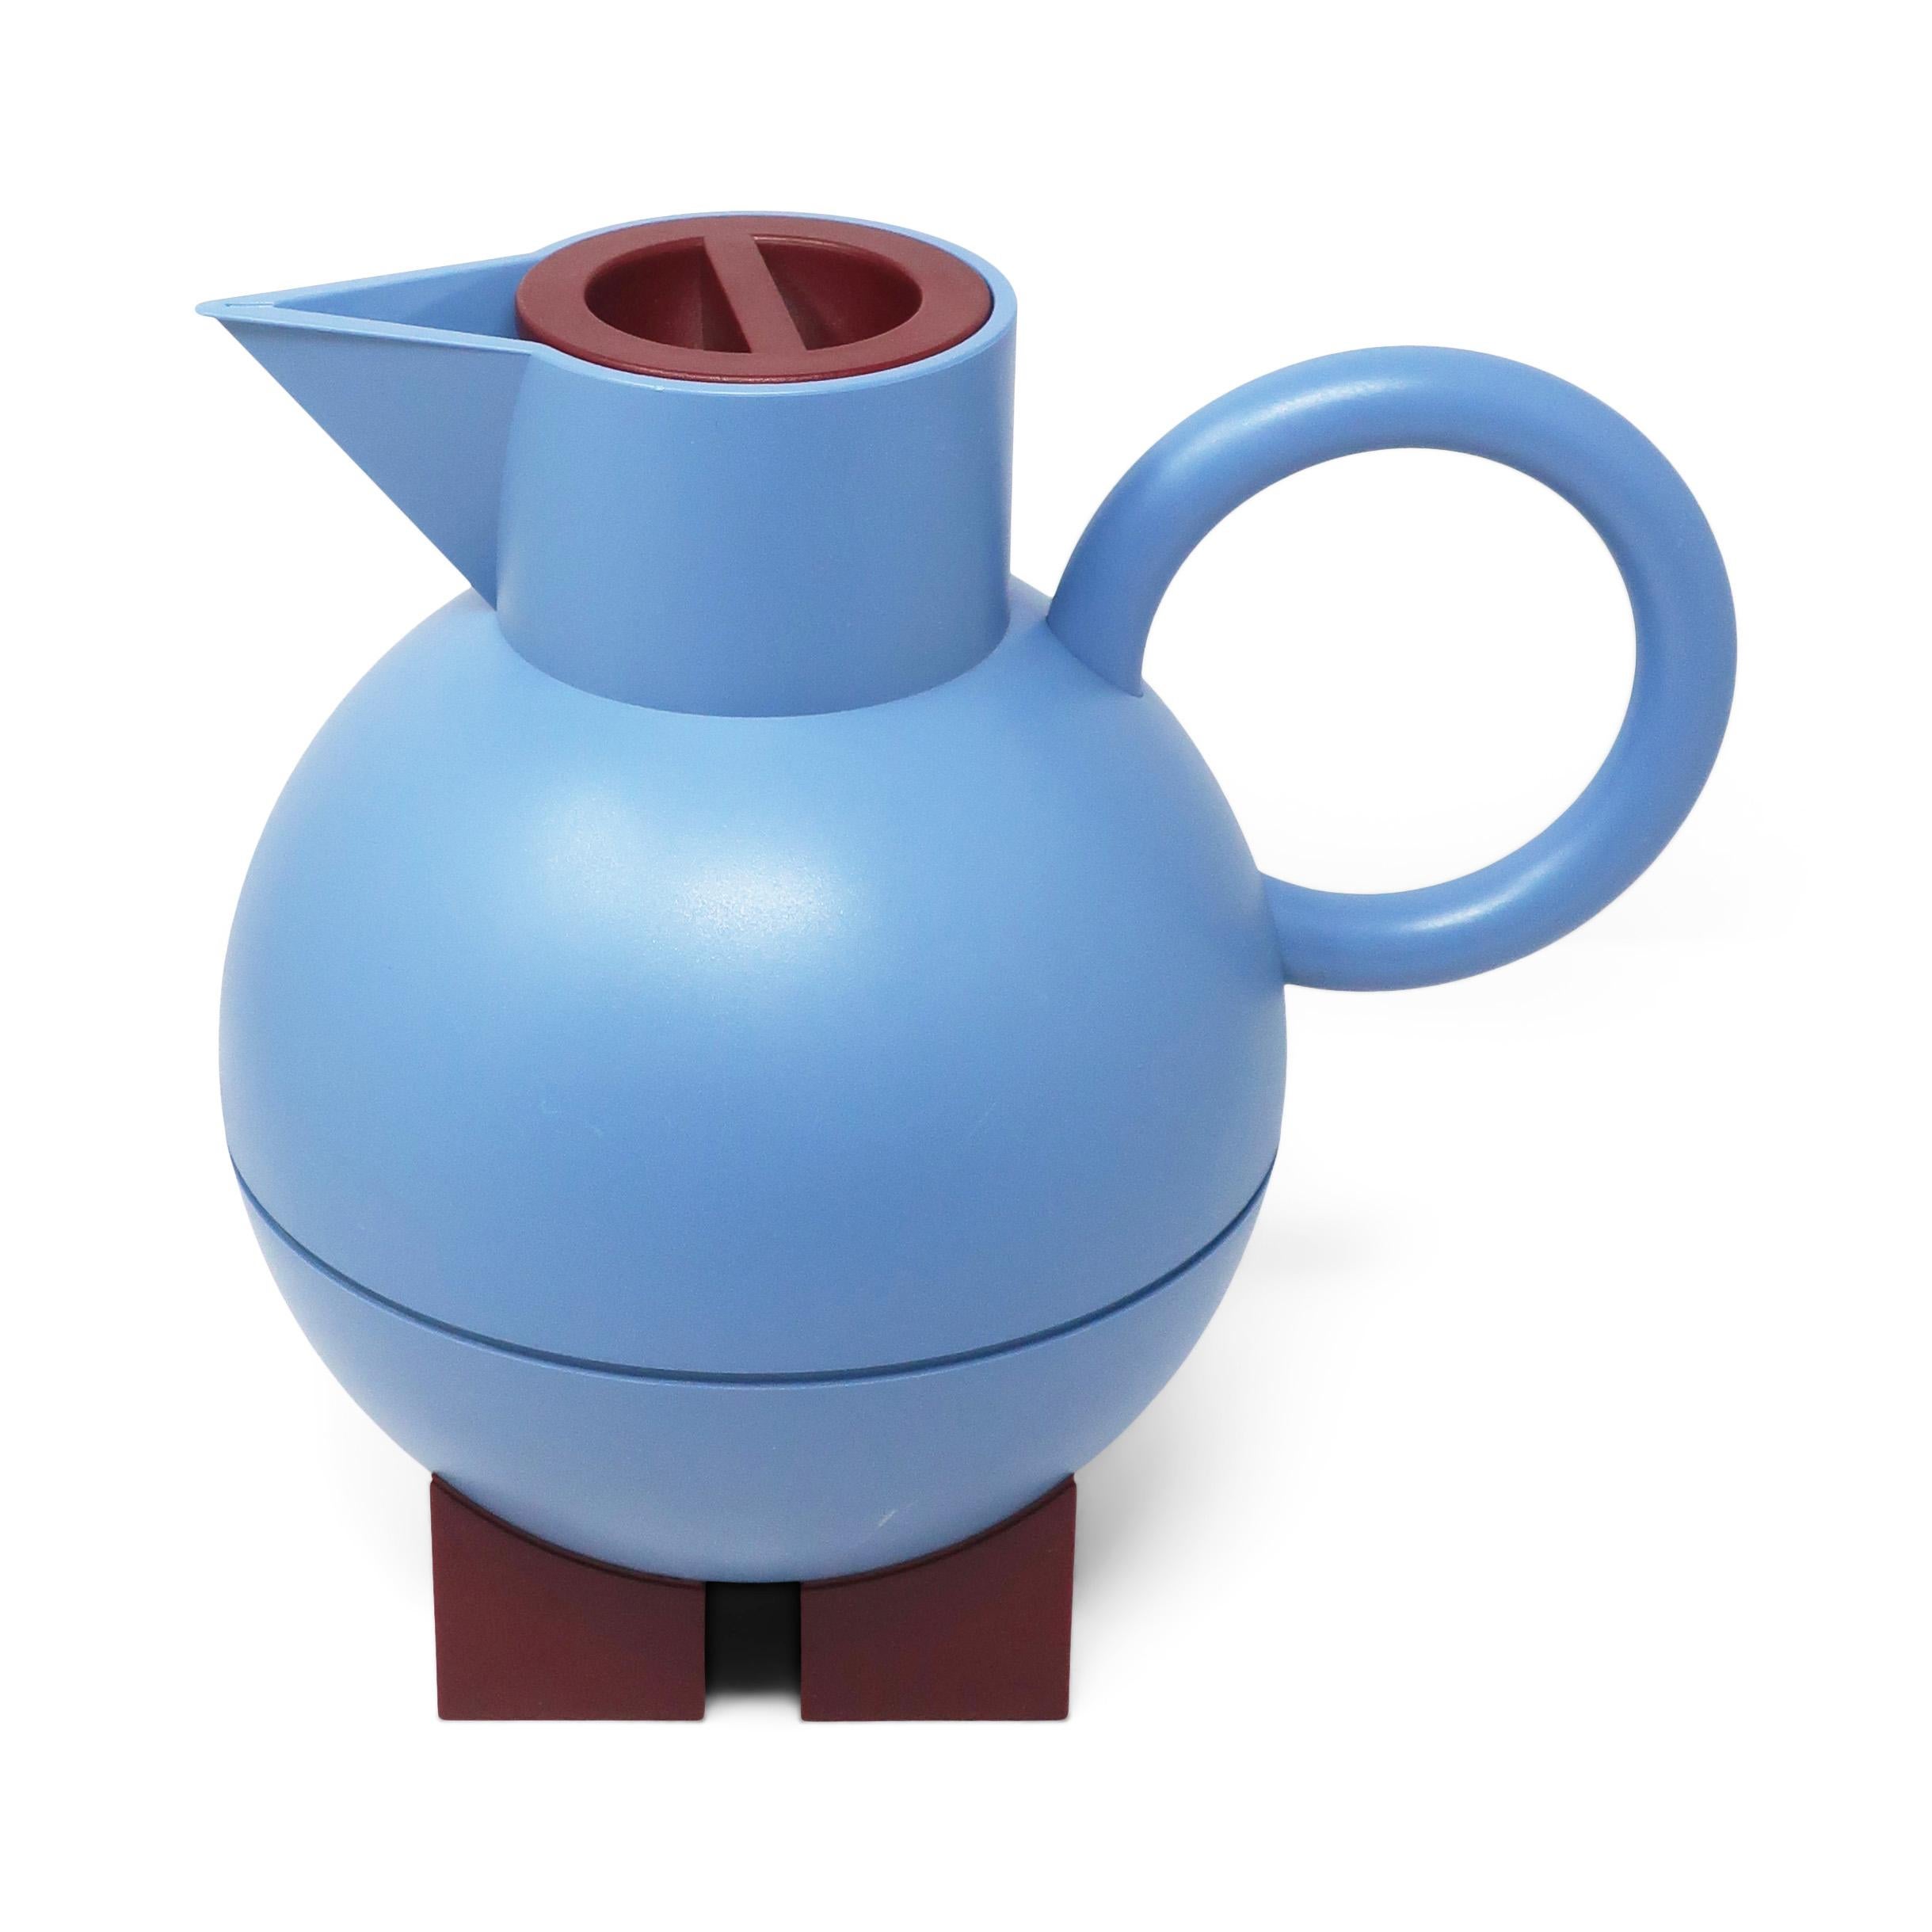 Post-Modern Postmodern Blue Euclid Thermos by Michael Graves for Alessi